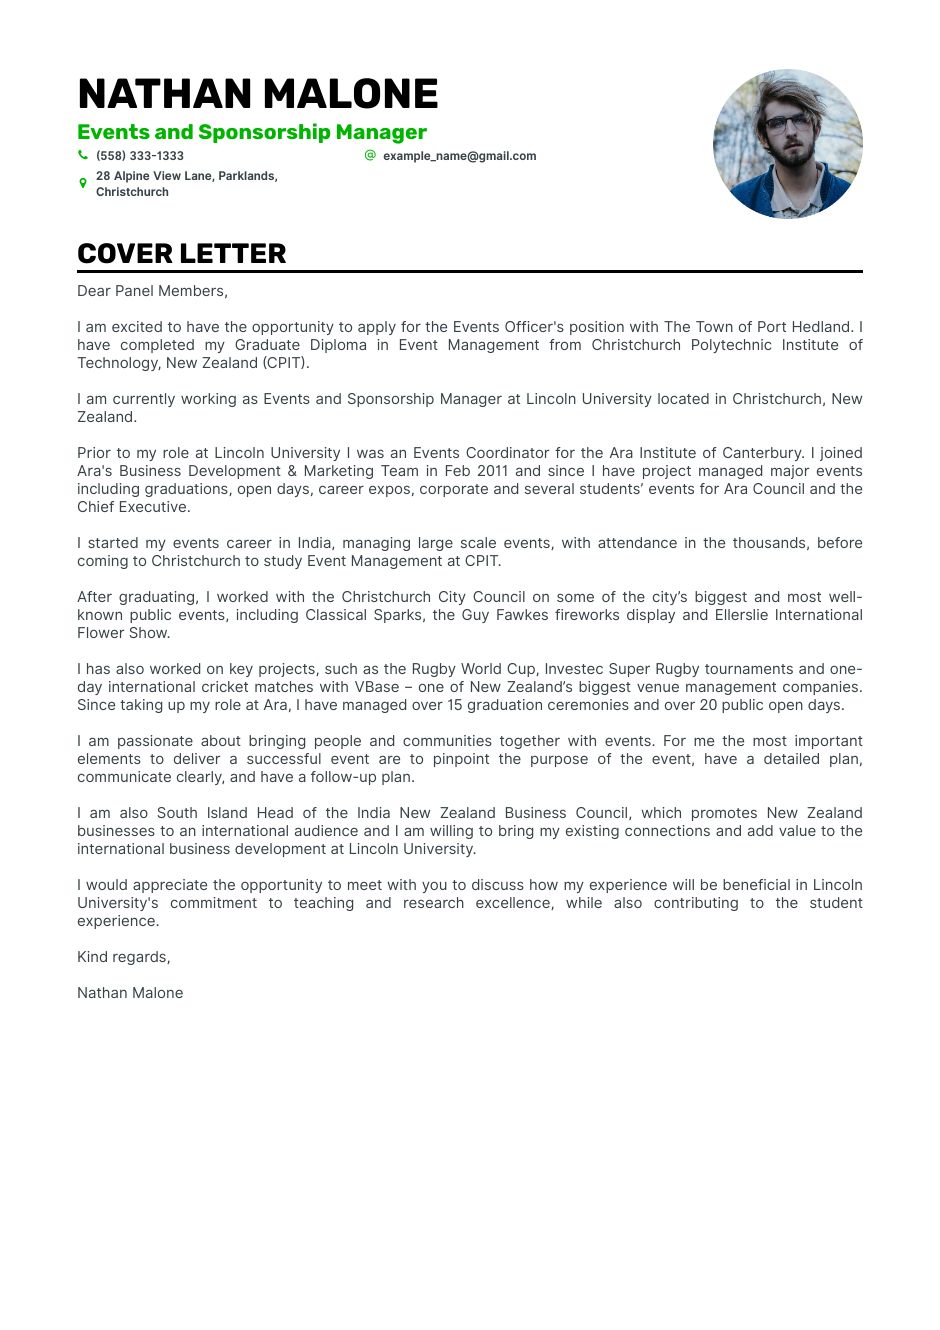 event director coverletter.png